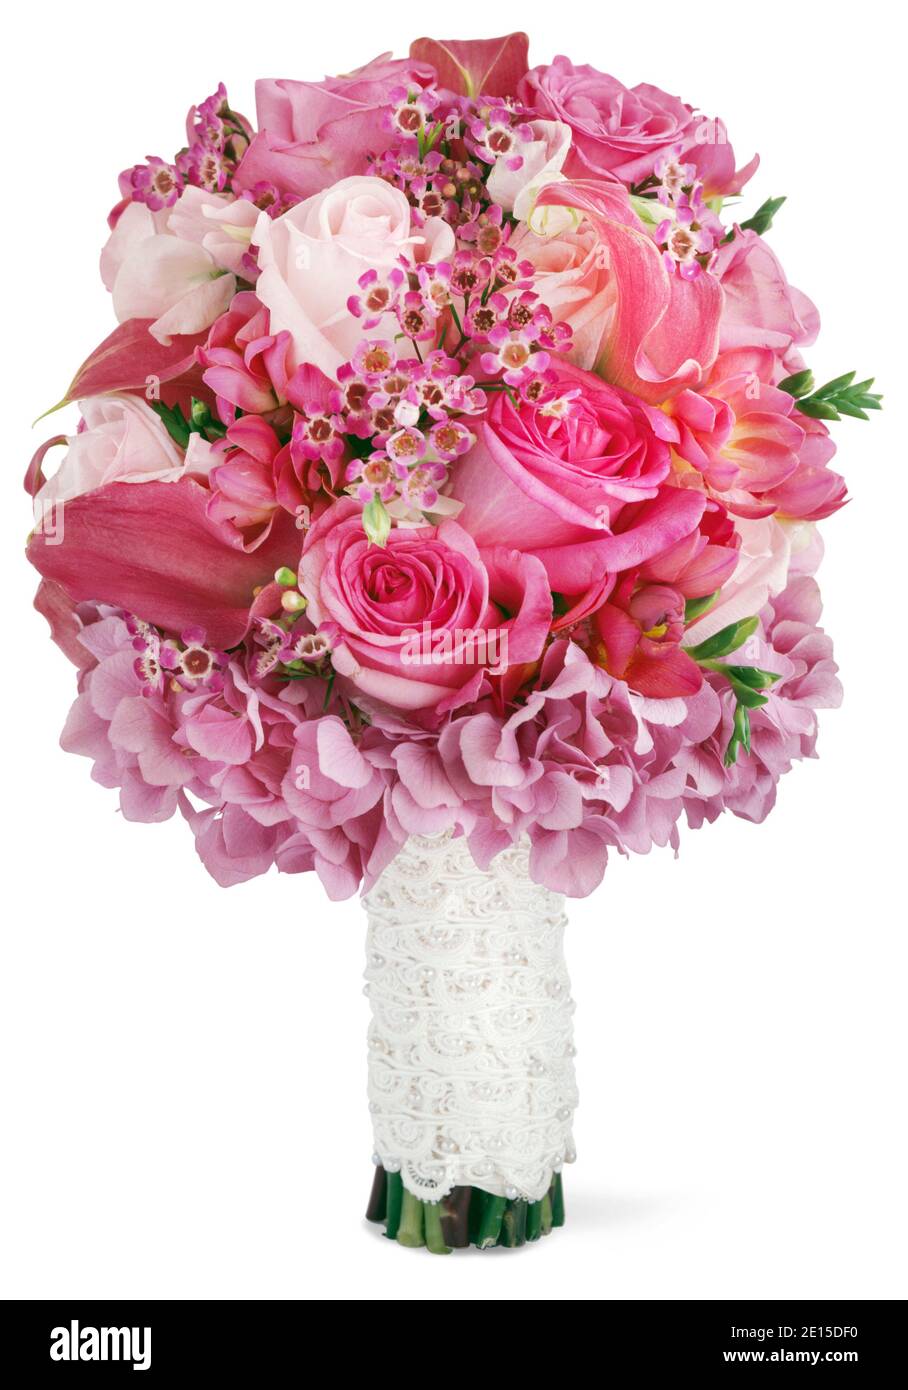 Pink fresh flower wedding bouquet with white lace ribbon handle  photographed on a white background Stock Photo - Alamy